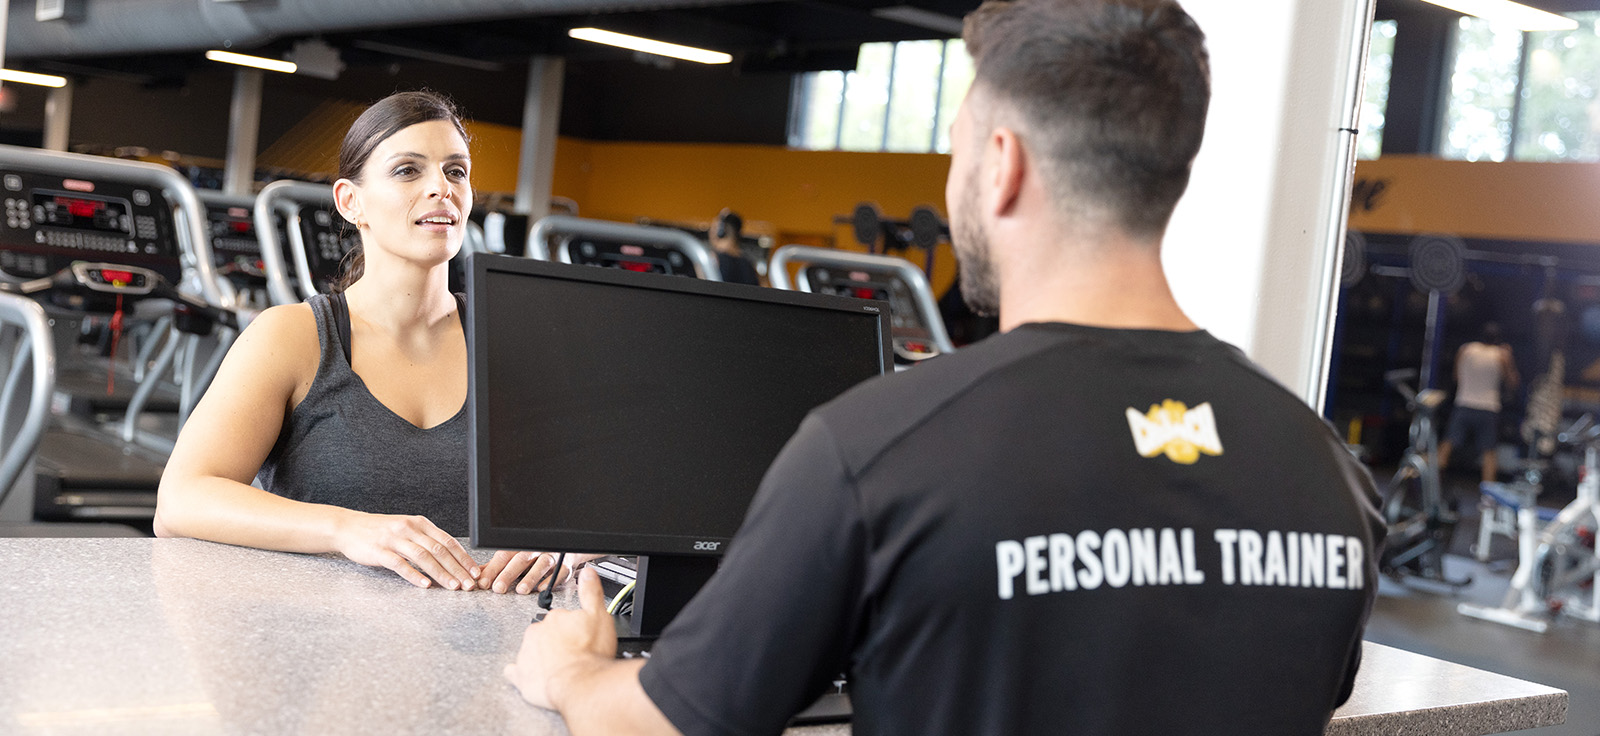 Do Personal Trainers Offer Advice on Diets & Nutrition?